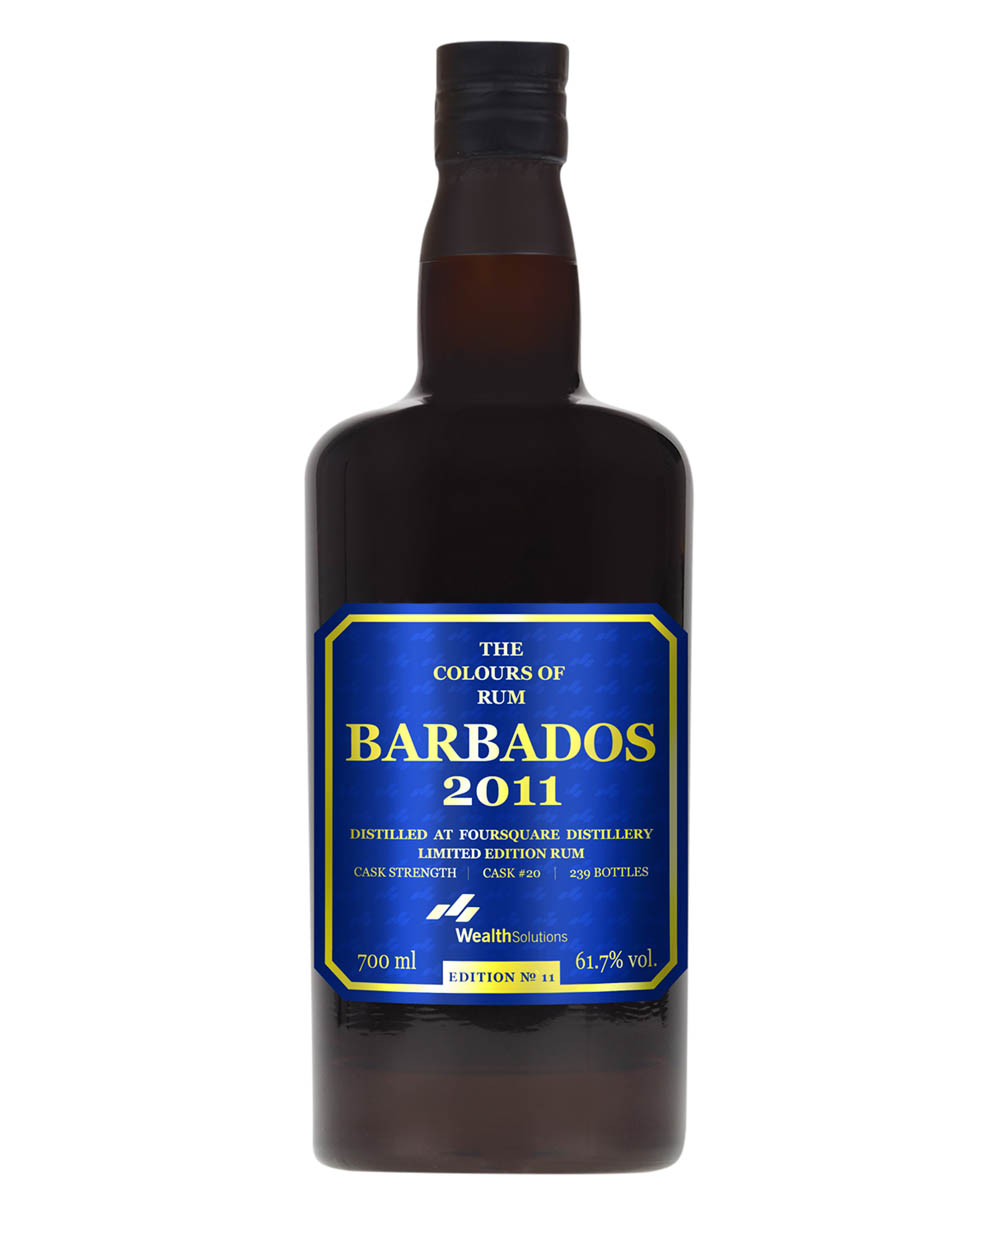 Foursquare Barbados 2011 The Colours Of Rum Edition 11 Musthave Malts MHM